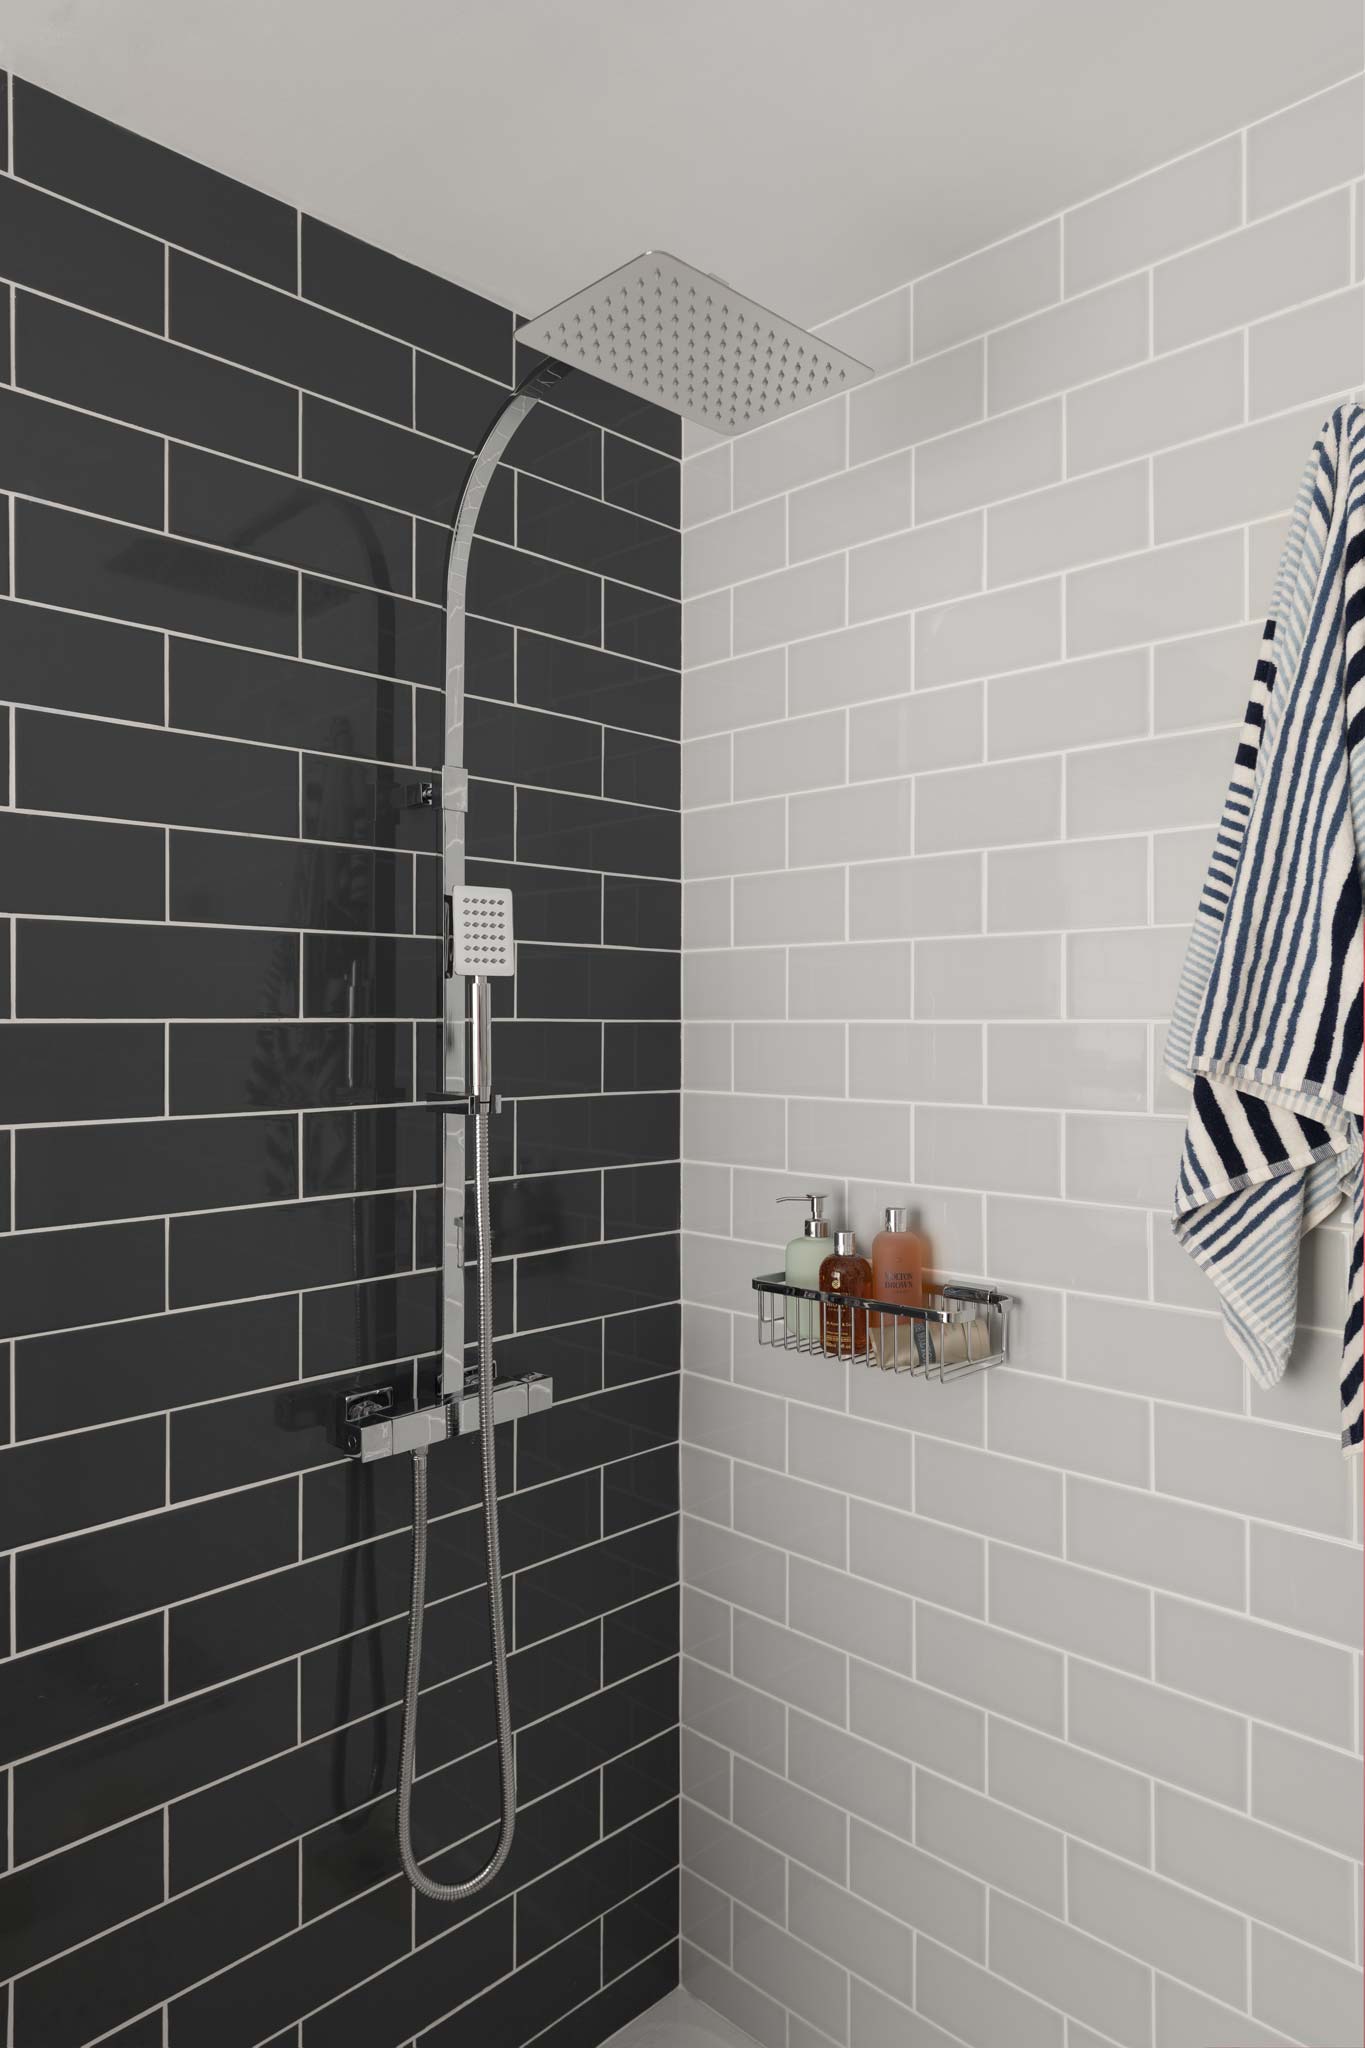 A wall mounted thermostatic shower mixer with a rigid riser on a tiled wall with a basket of shower bottles and a towel